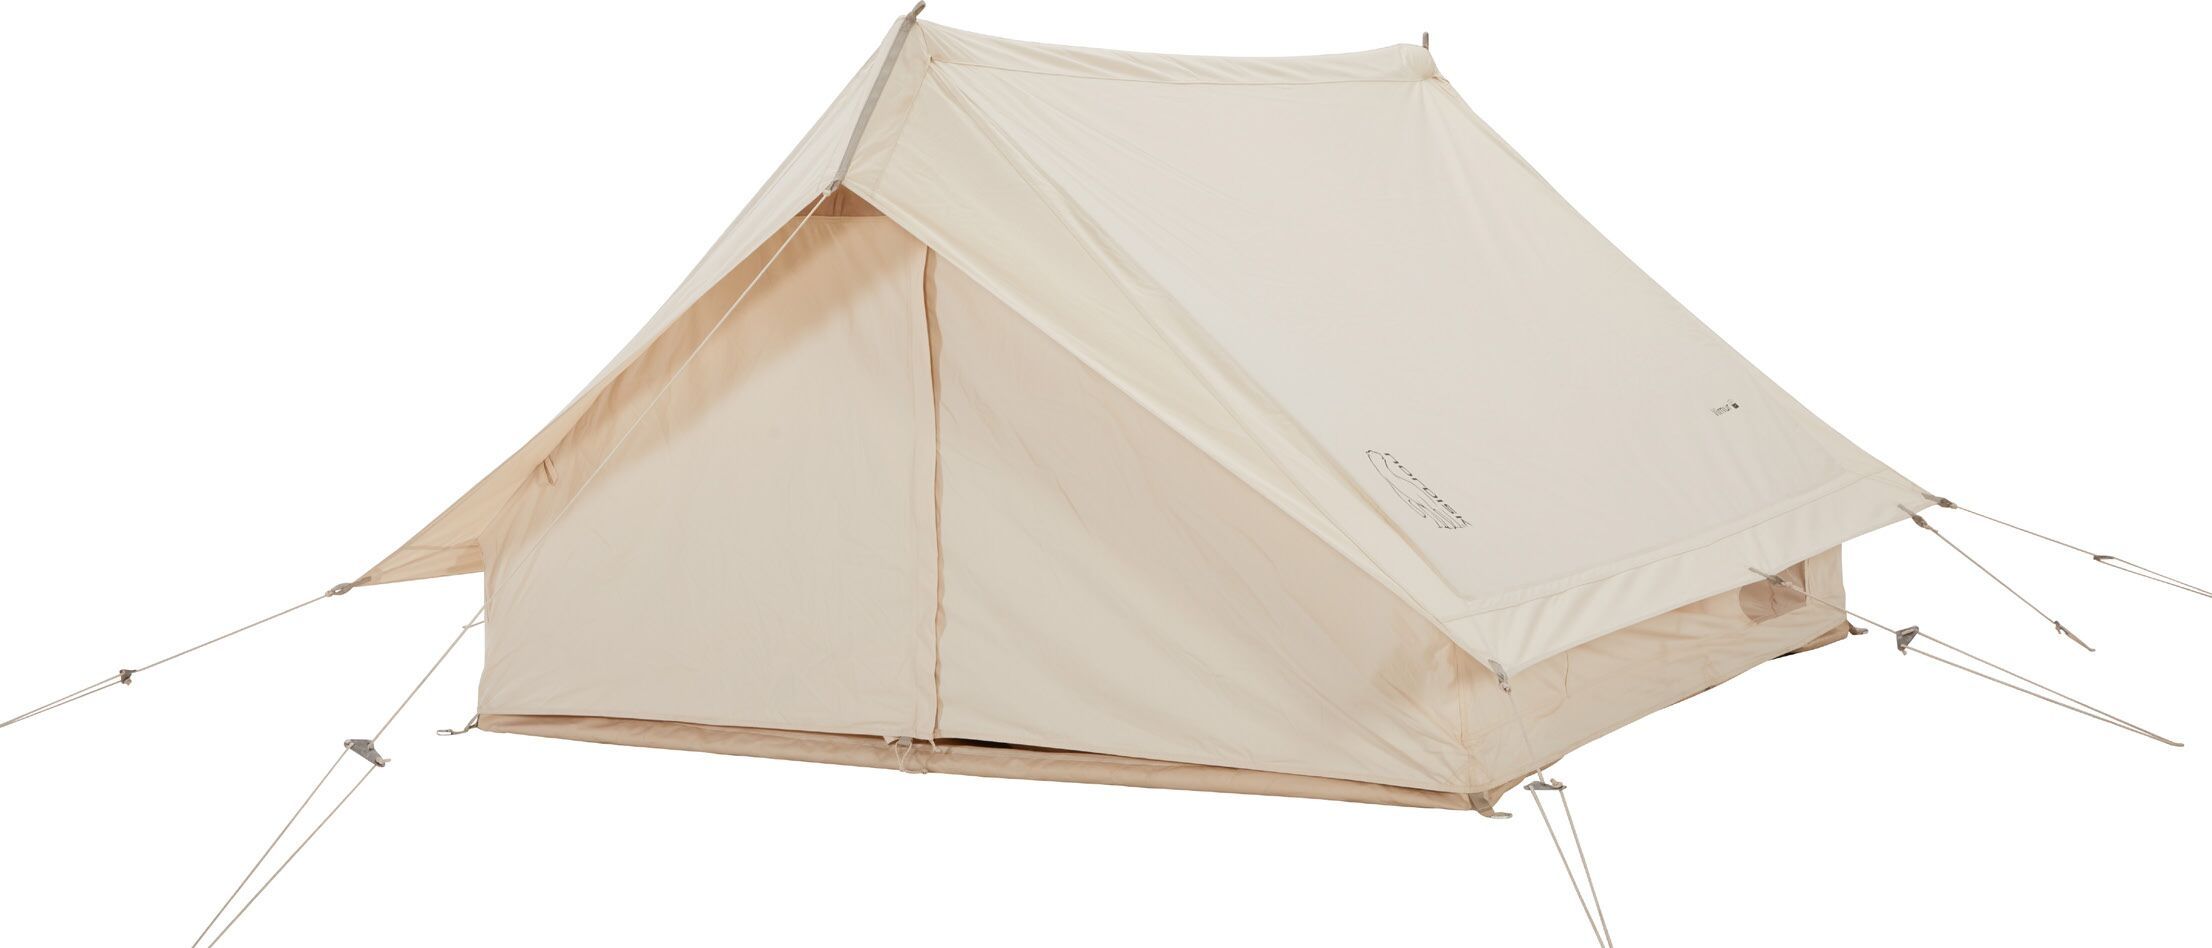 NORDISK VIMUR 4.8 WITH STEEL POLE